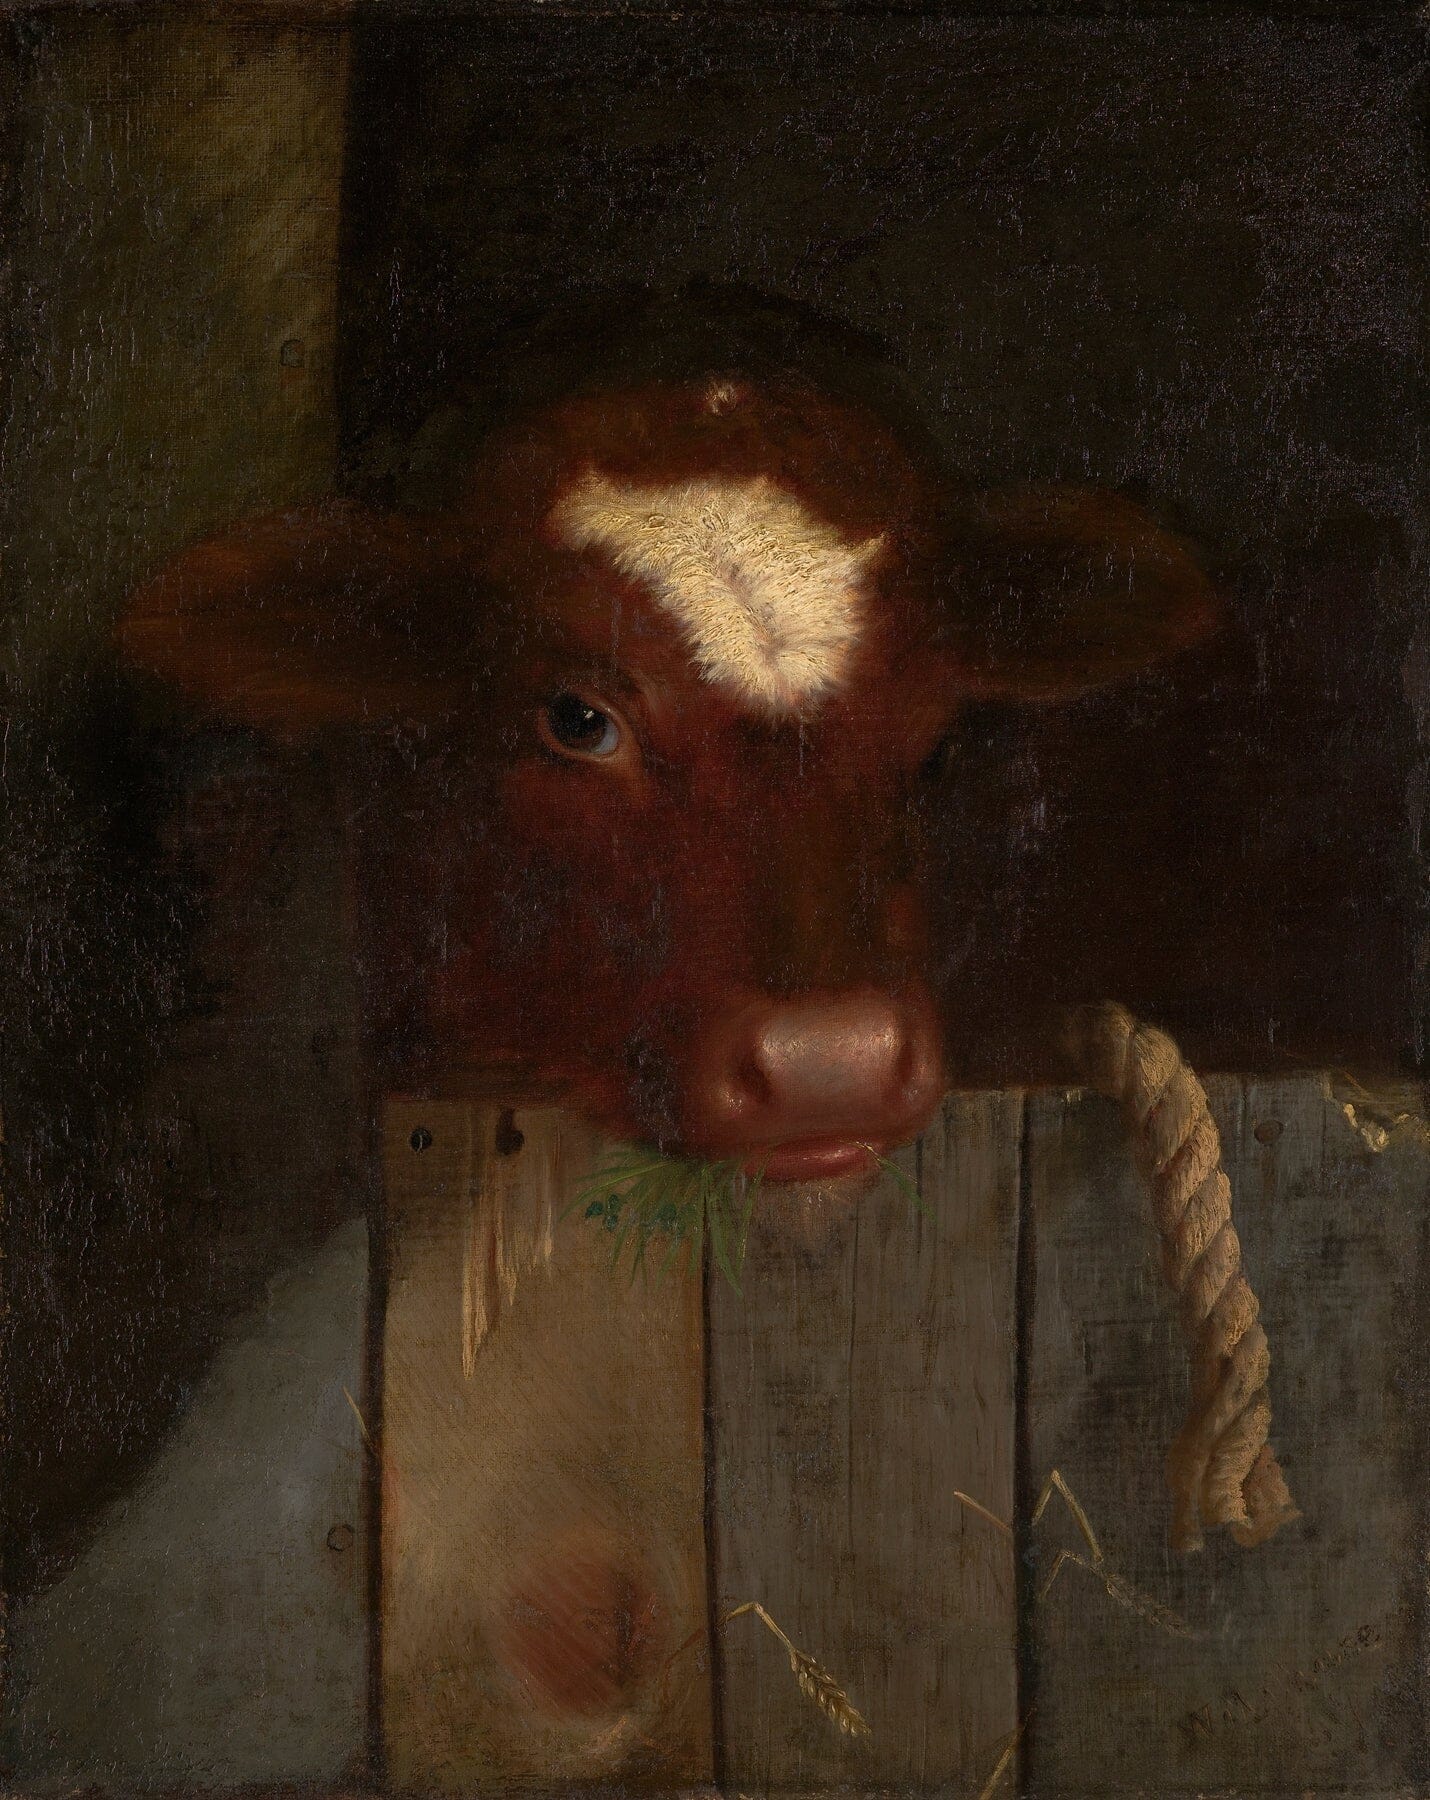 The Family Cow (1800s) | Vintage cow art prints | William Merritt Chase Posters, Prints, & Visual Artwork The Trumpet Shop   